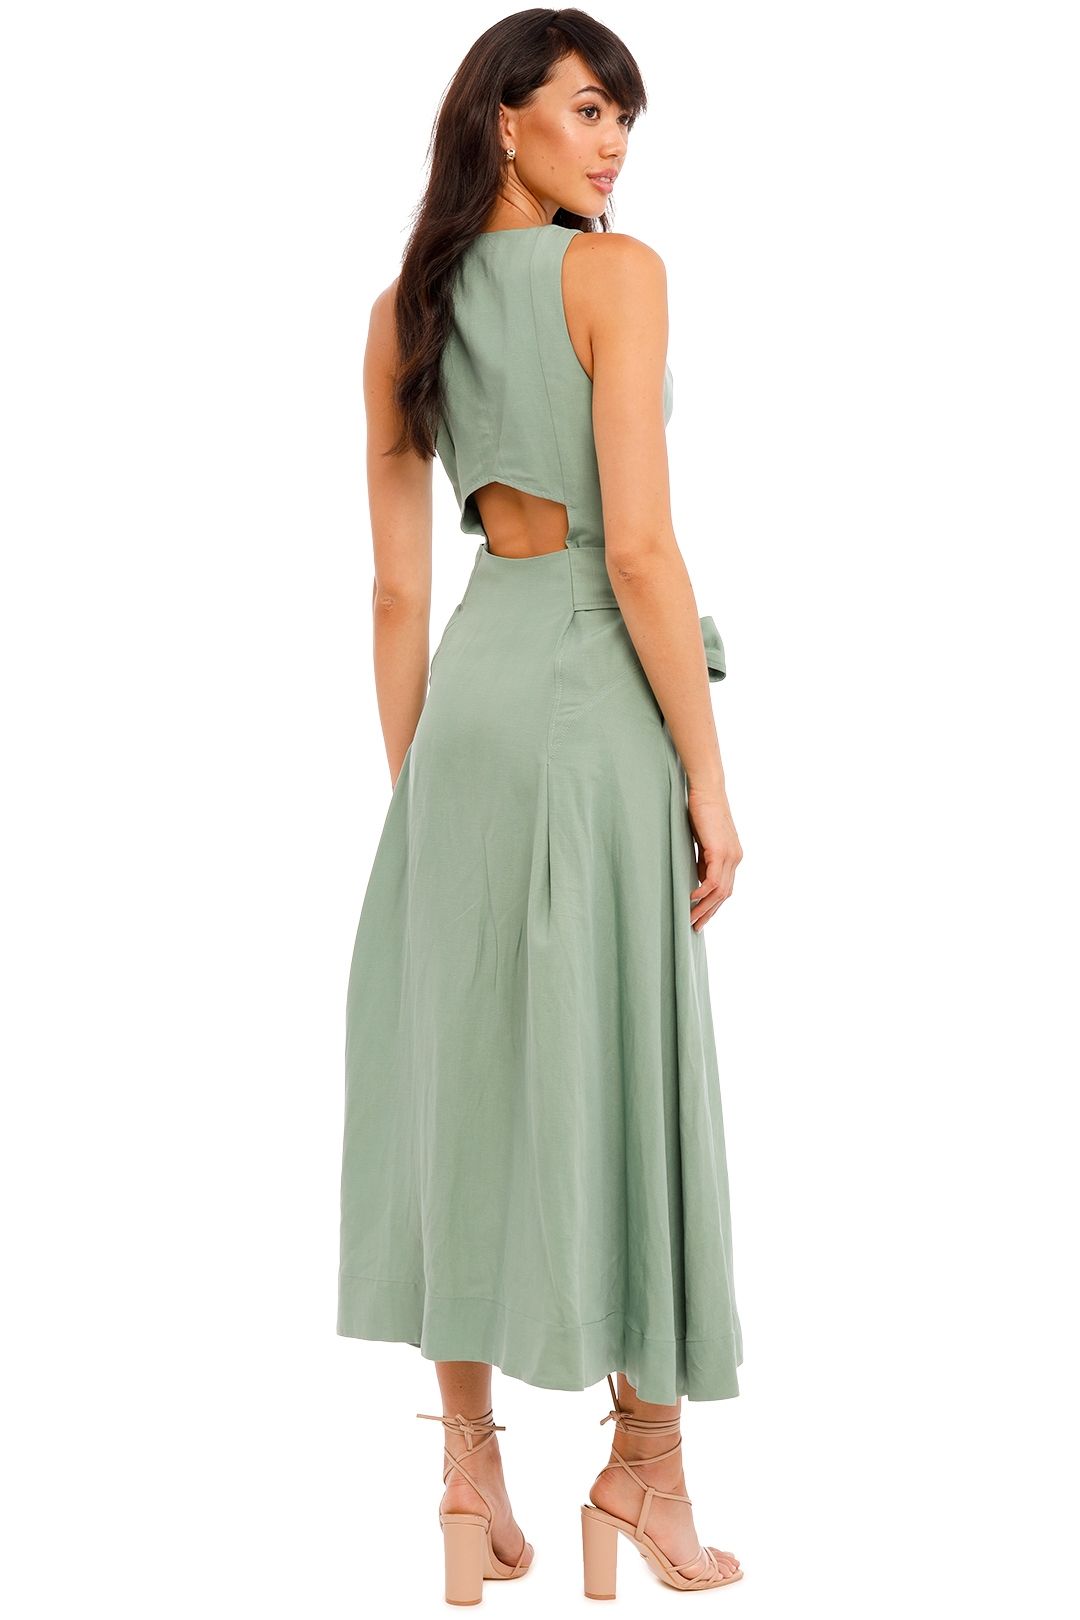 Lantern Dress in Mint Ginger and Smart cutout